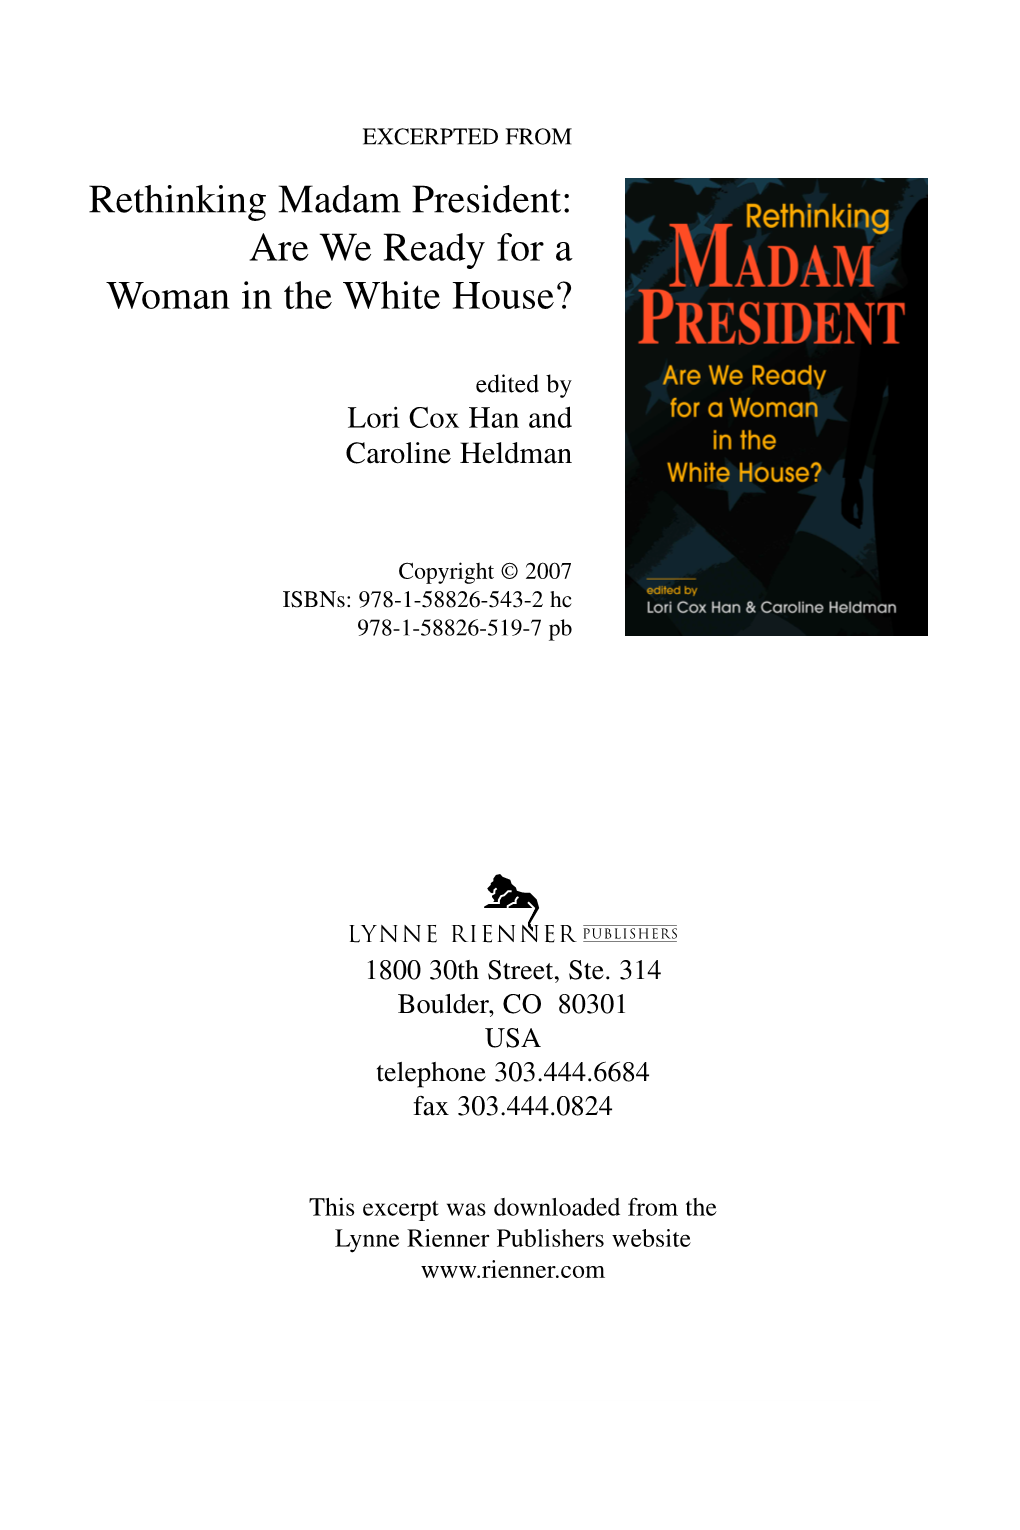 Rethinking Madam President: Are We Ready for a Woman in the White House?